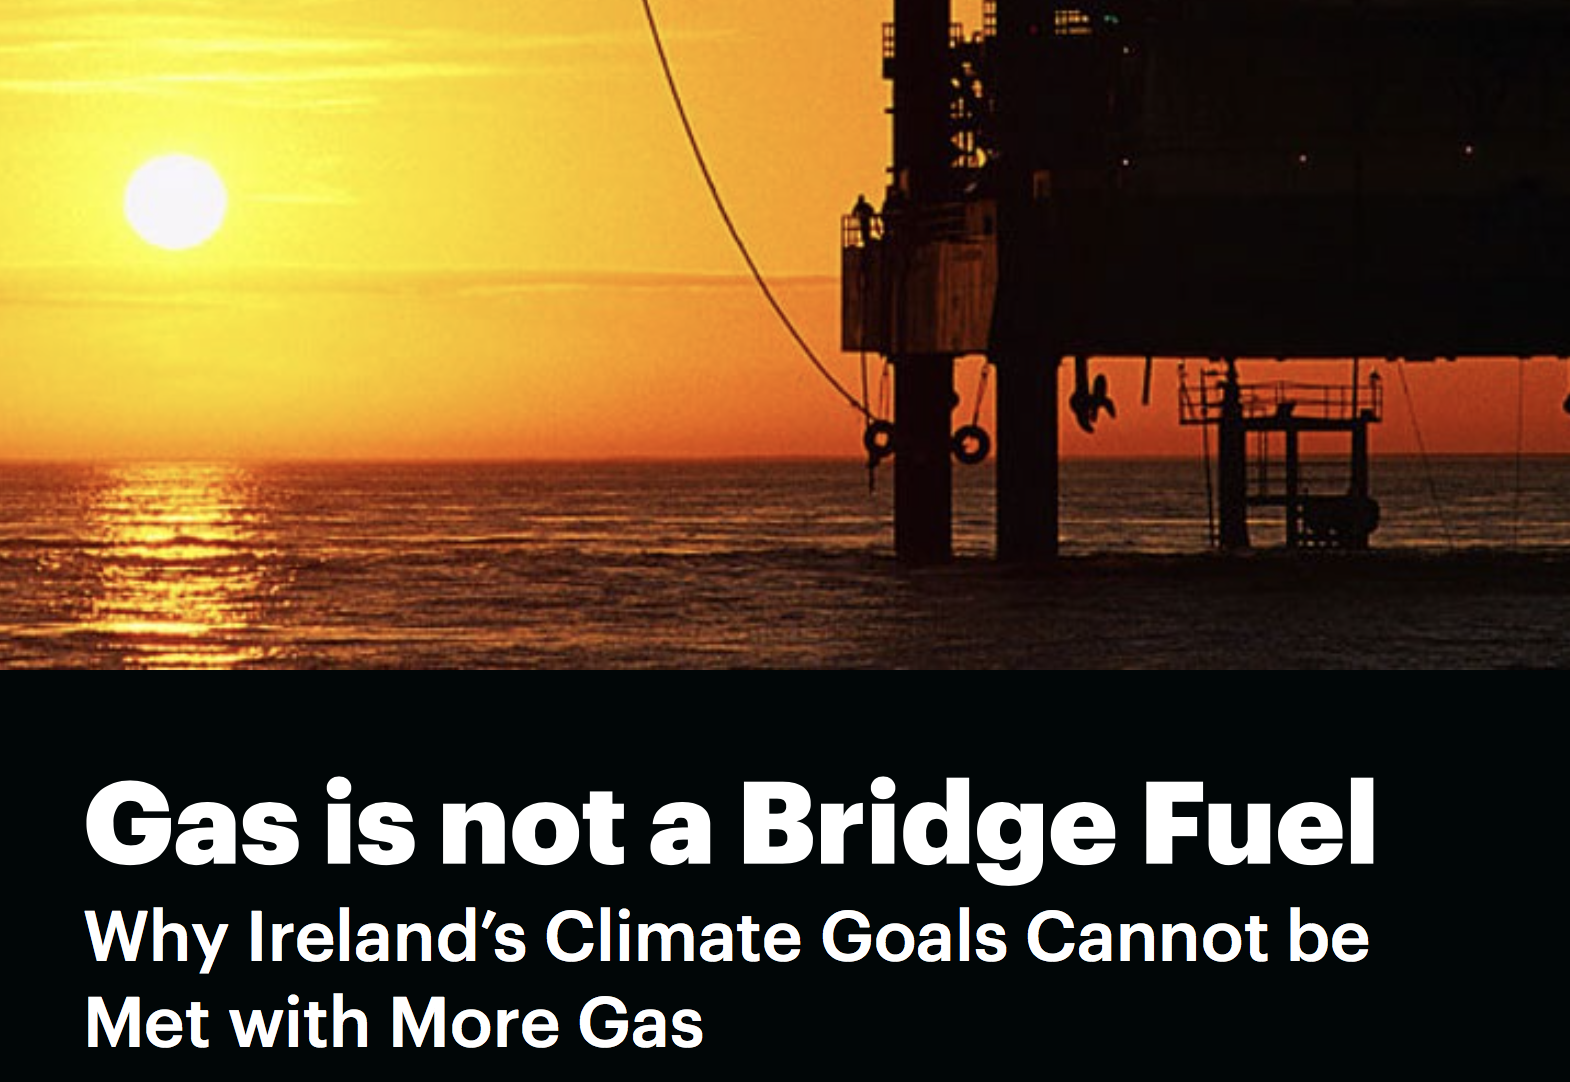 Gas Is Not a Bridge Fuel: Why Ireland’s Climate Goals Cannot Be Met with More Gas